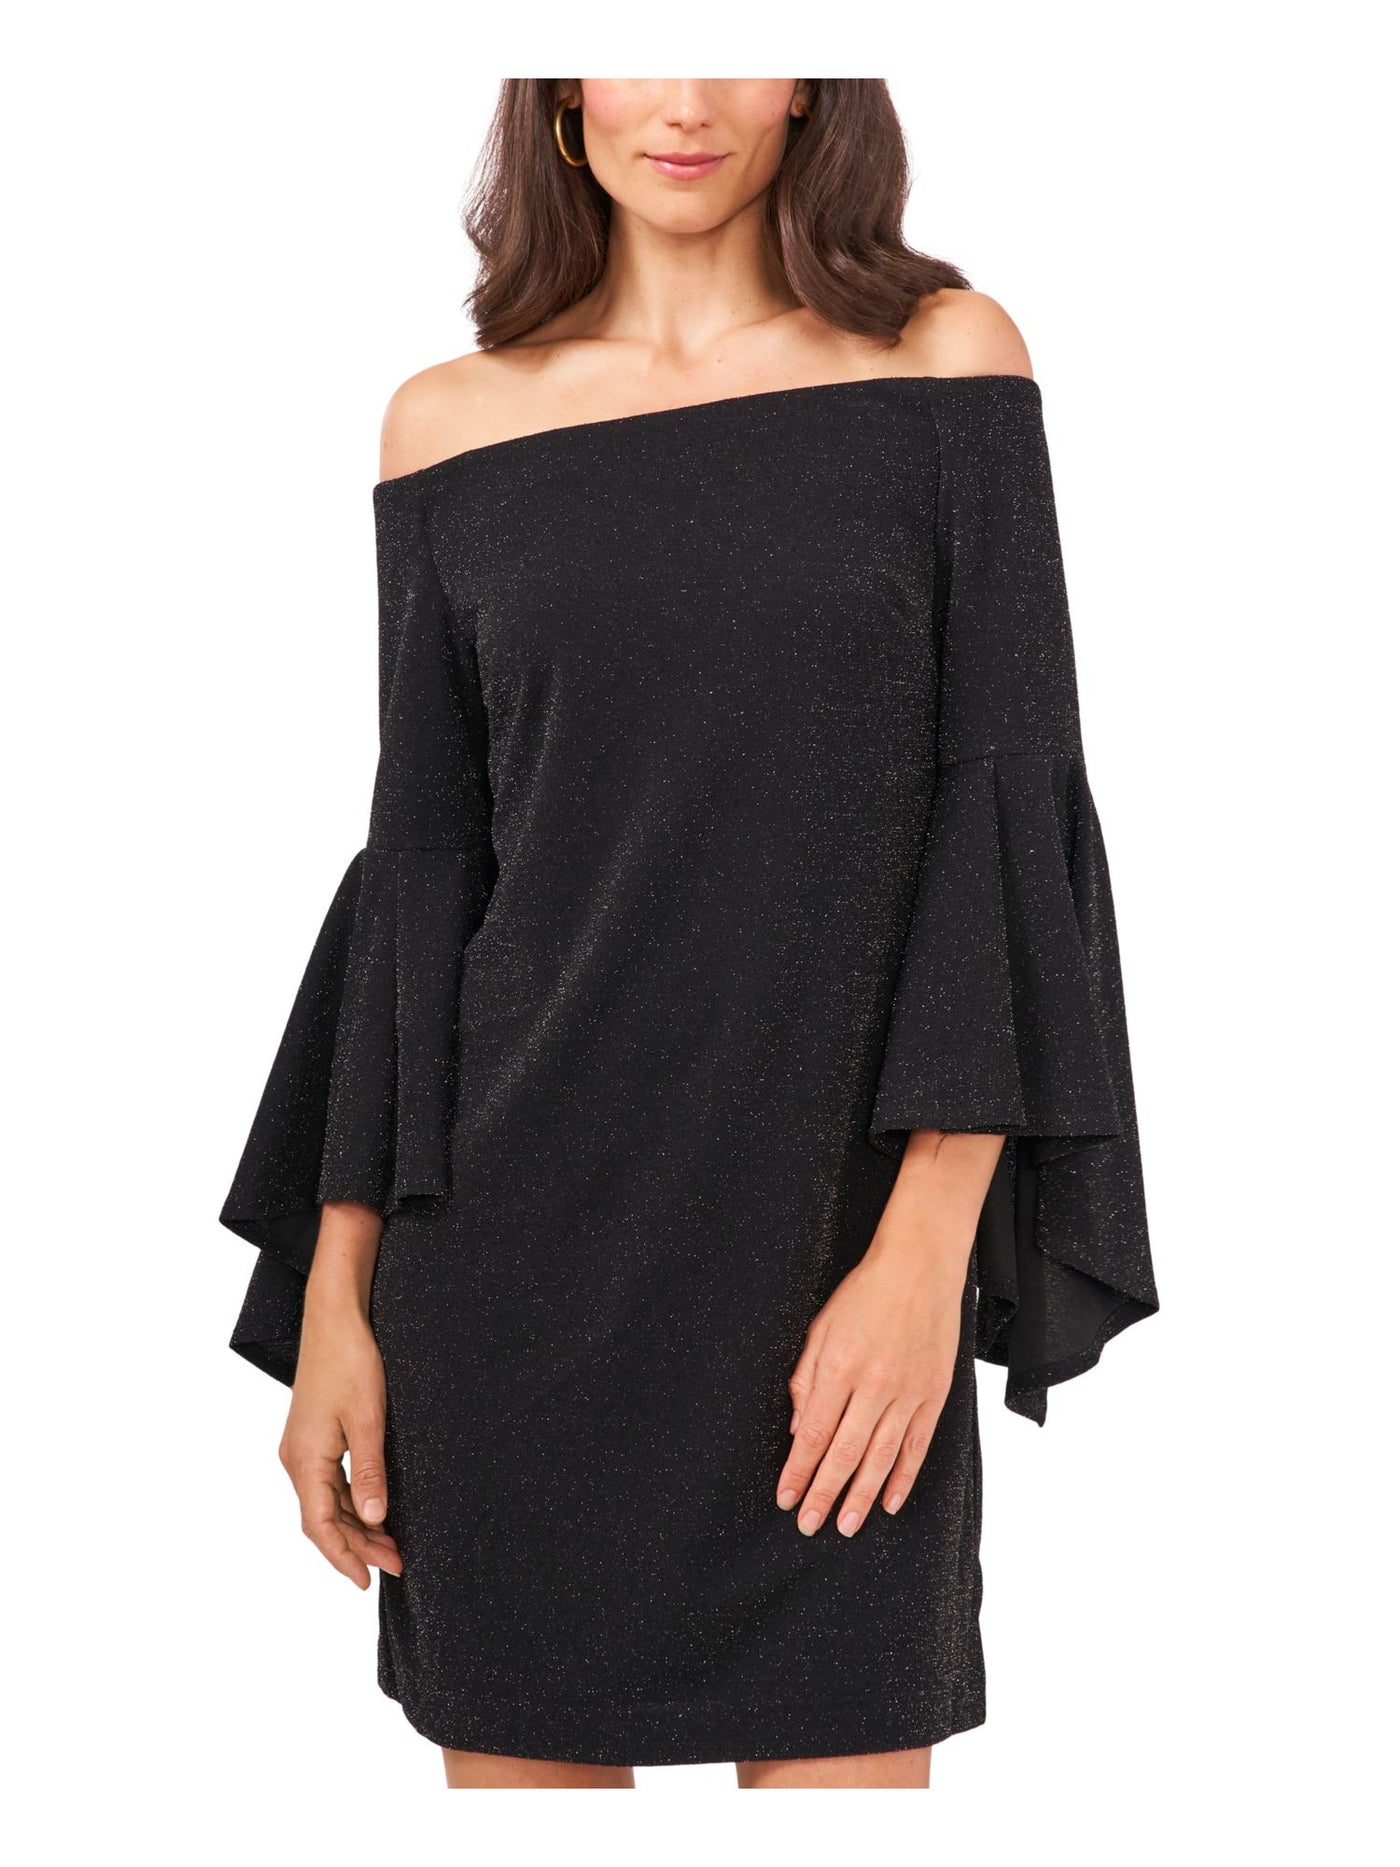 VINCE CAMUTO Womens Black Glitter Pullover Lined Bell Sleeve Off Shoulder Short Cocktail Shift Dress XS